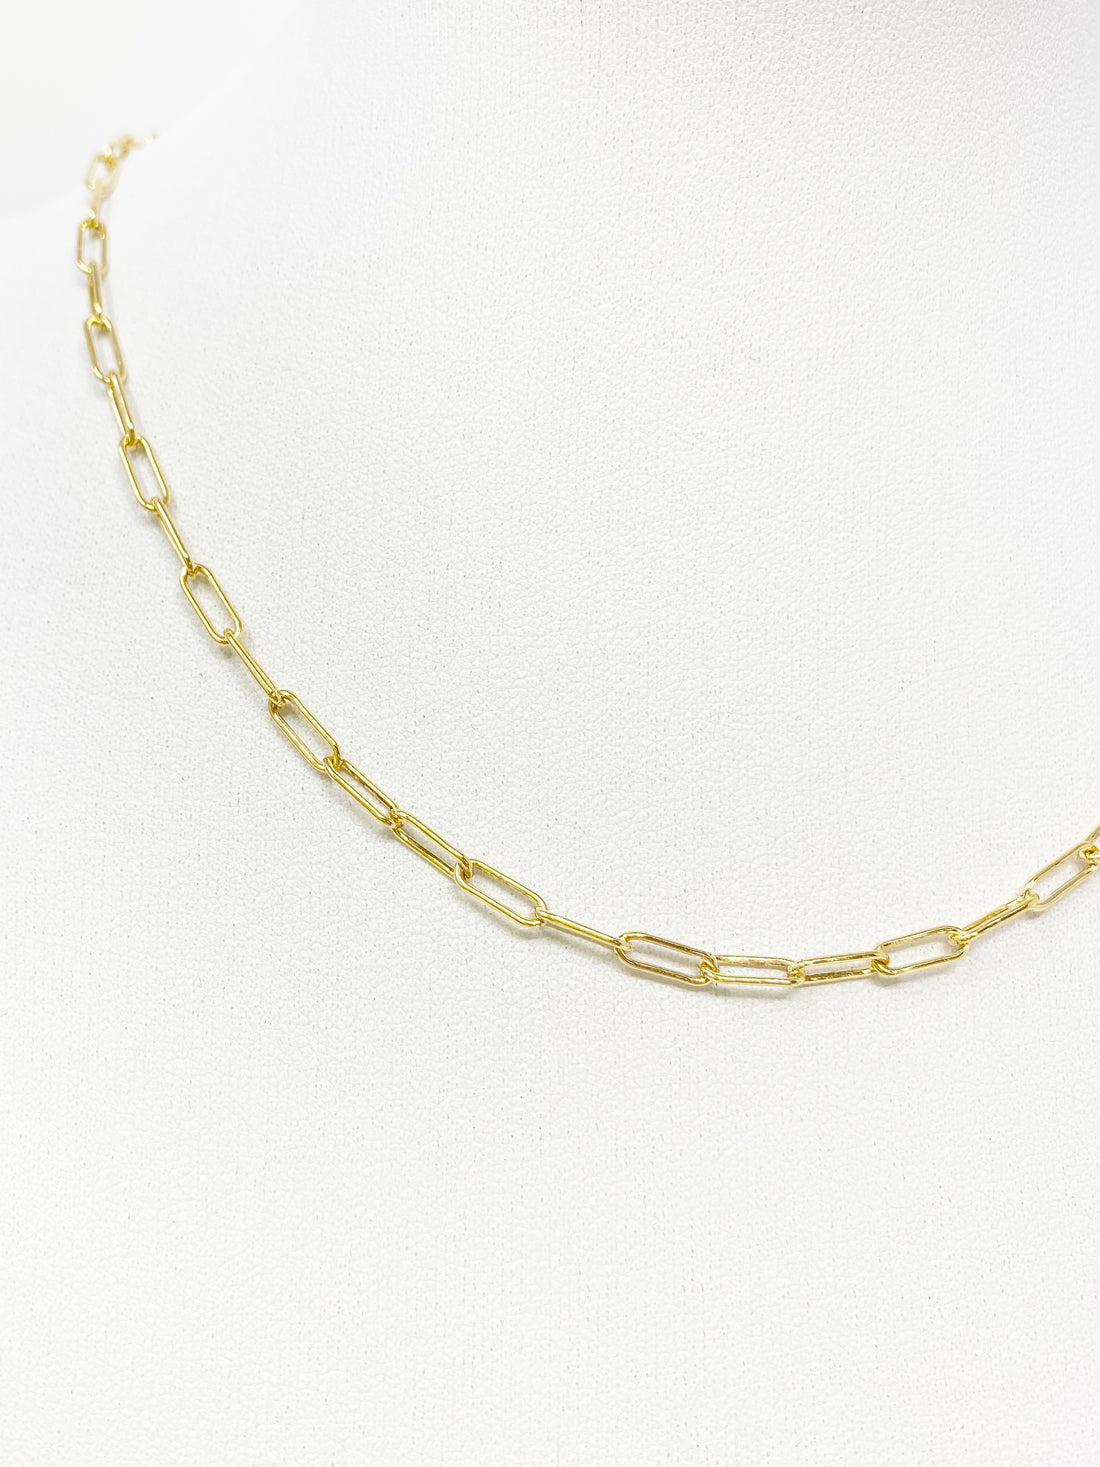 Ellie Delicate Chainlink Necklace in 14K Gold